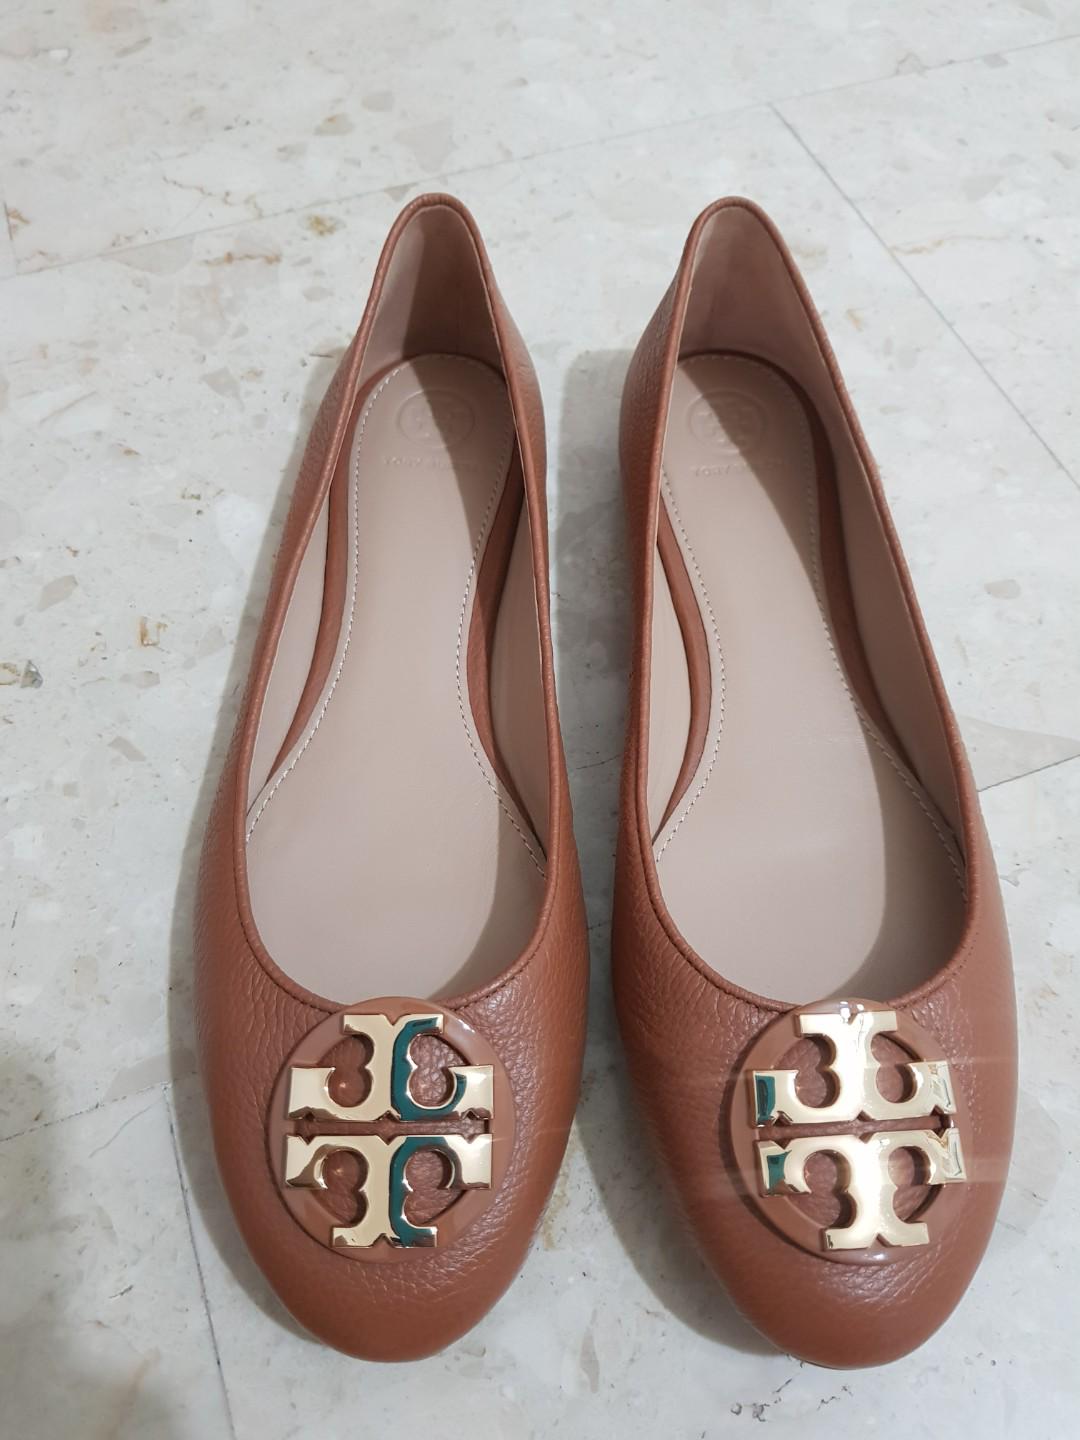 tory burch shoe size in inches